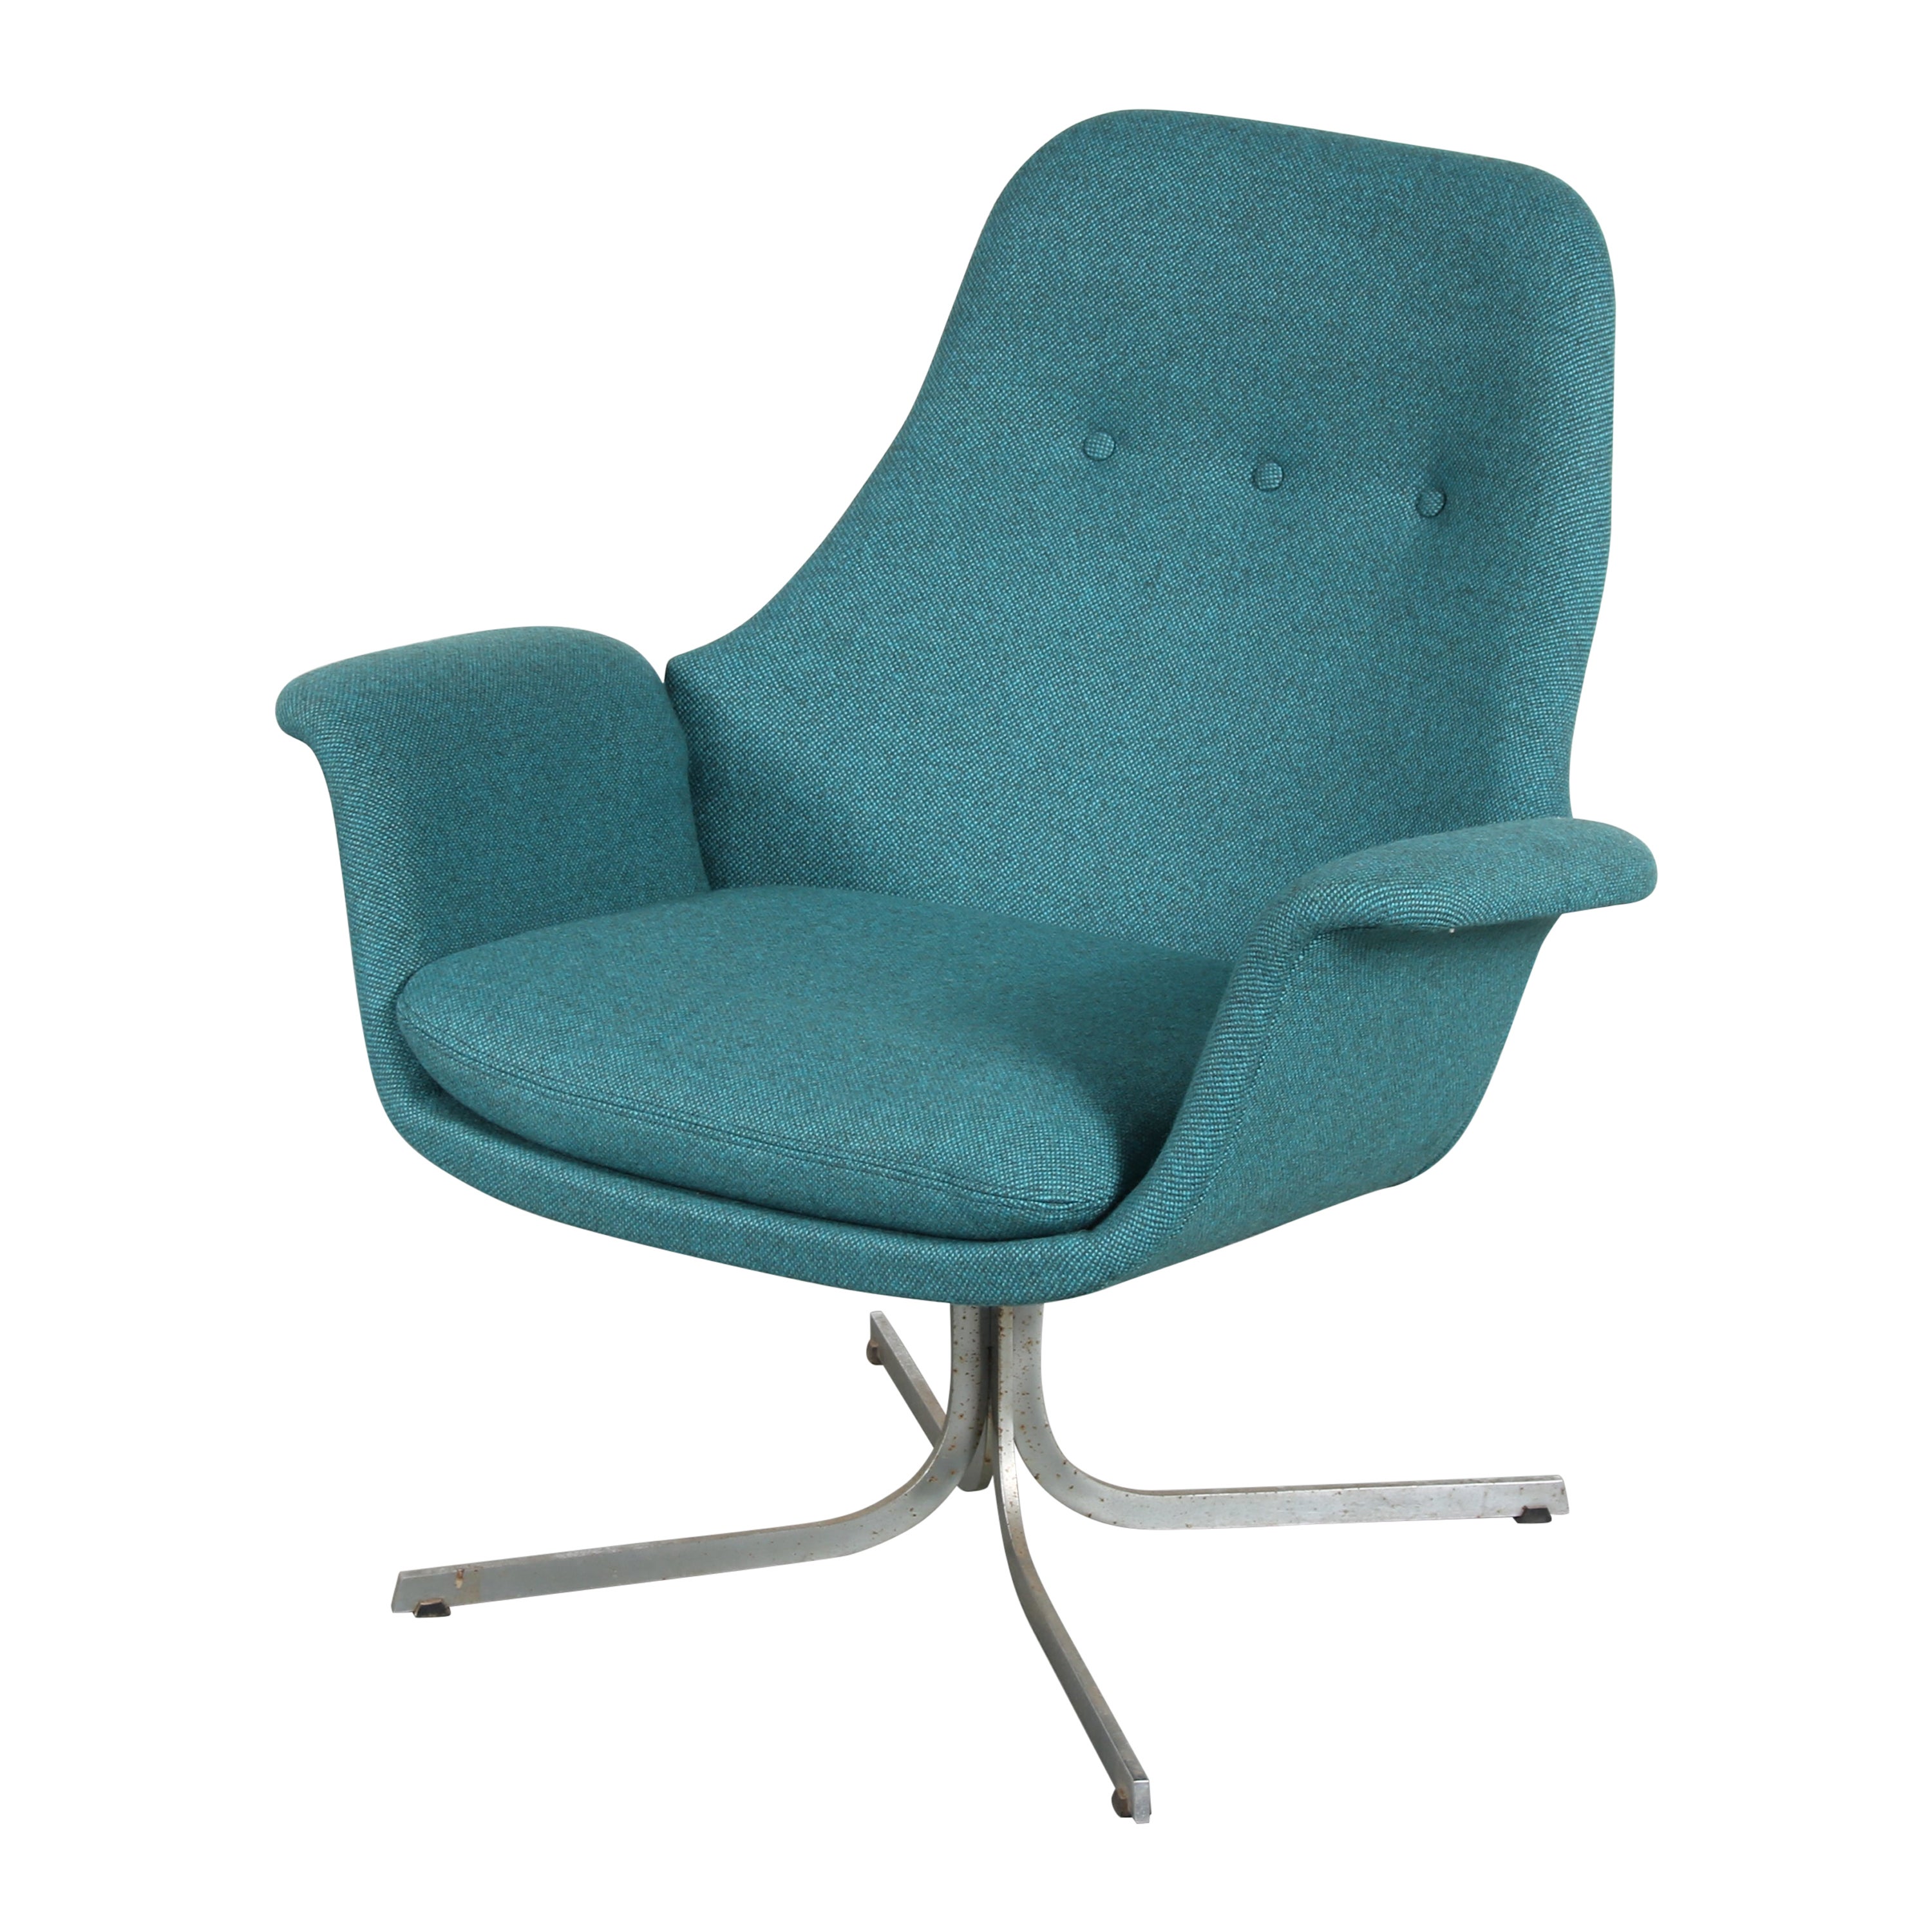 Rare Pierre Paulin Lounge Chair for Artifort, Netherlands 1950 For Sale